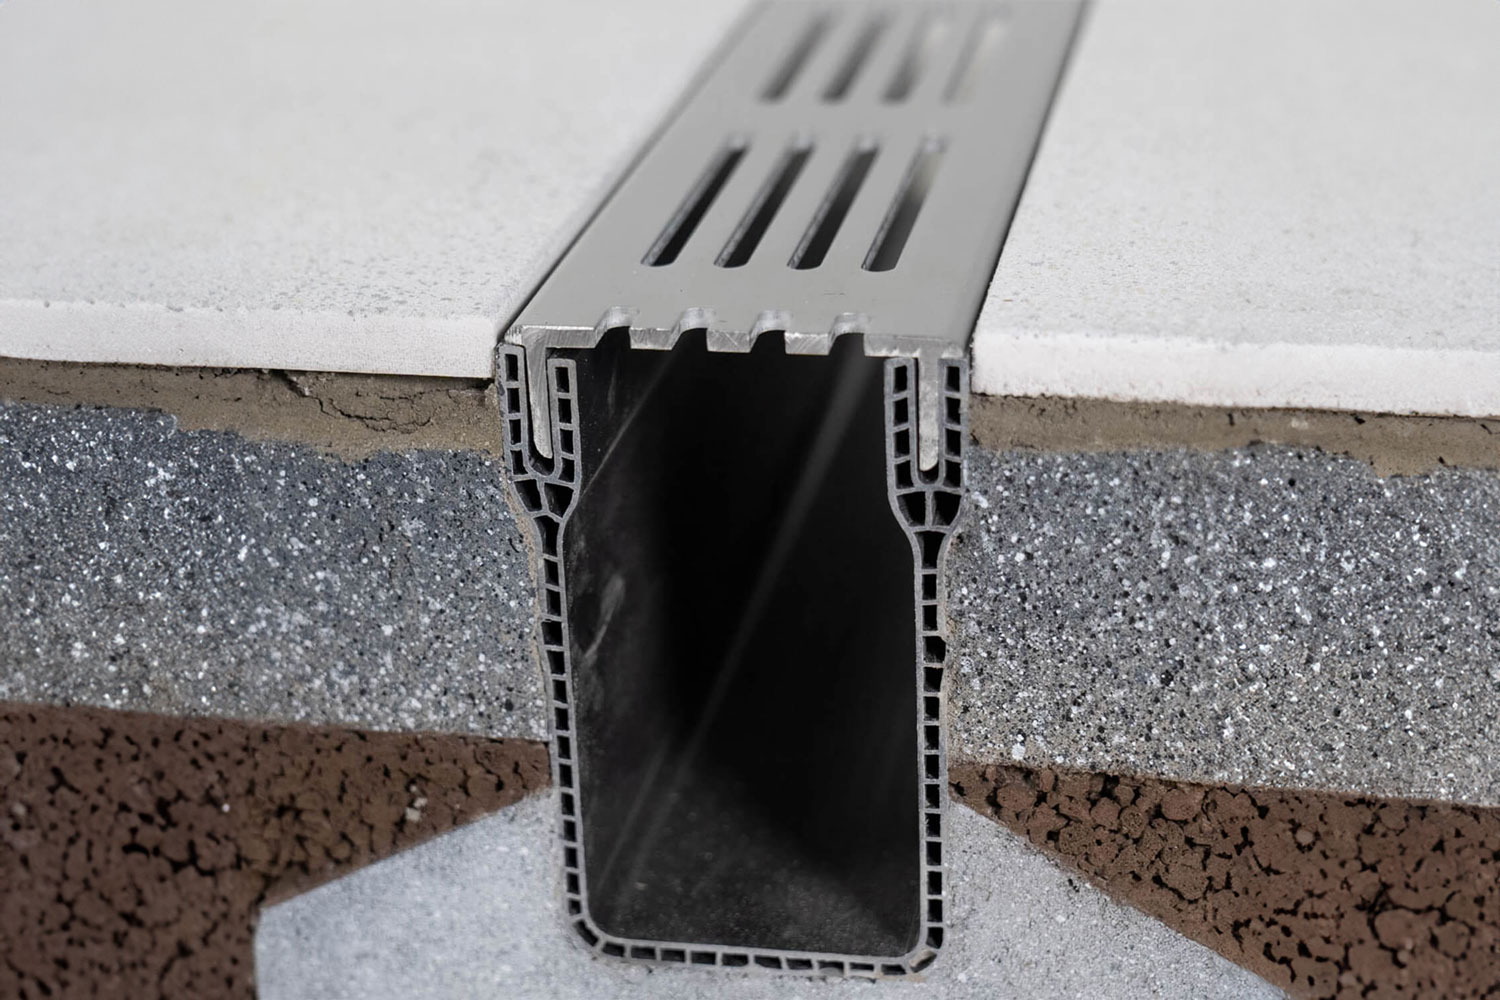 Cross Section Installation of a Alusthetic Threshold Drainage Channel